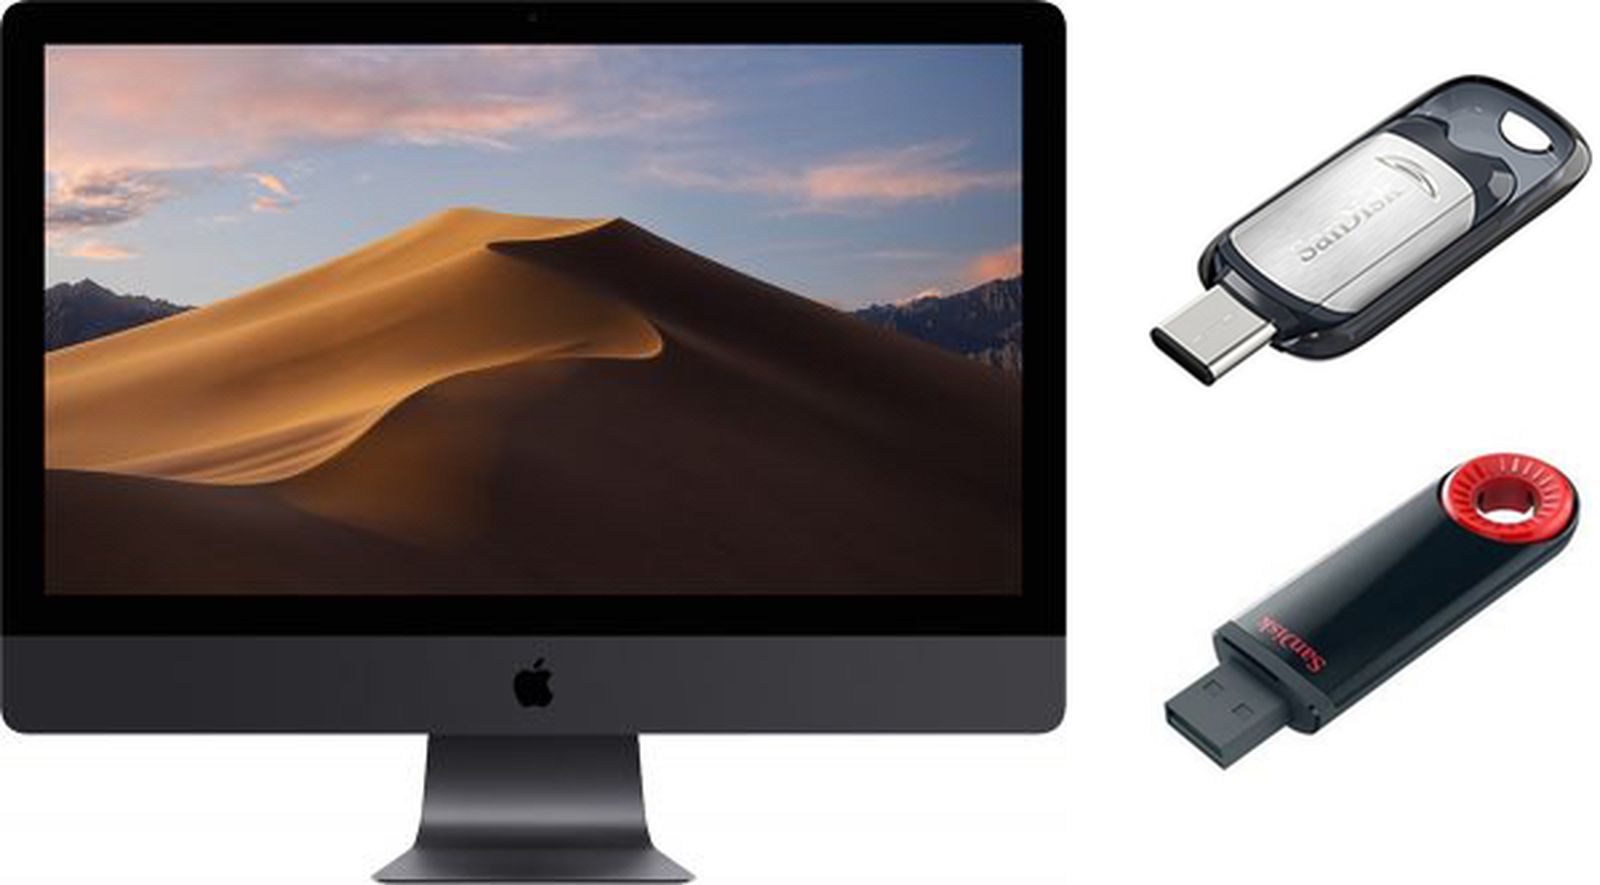 clean install macos mojave without usb